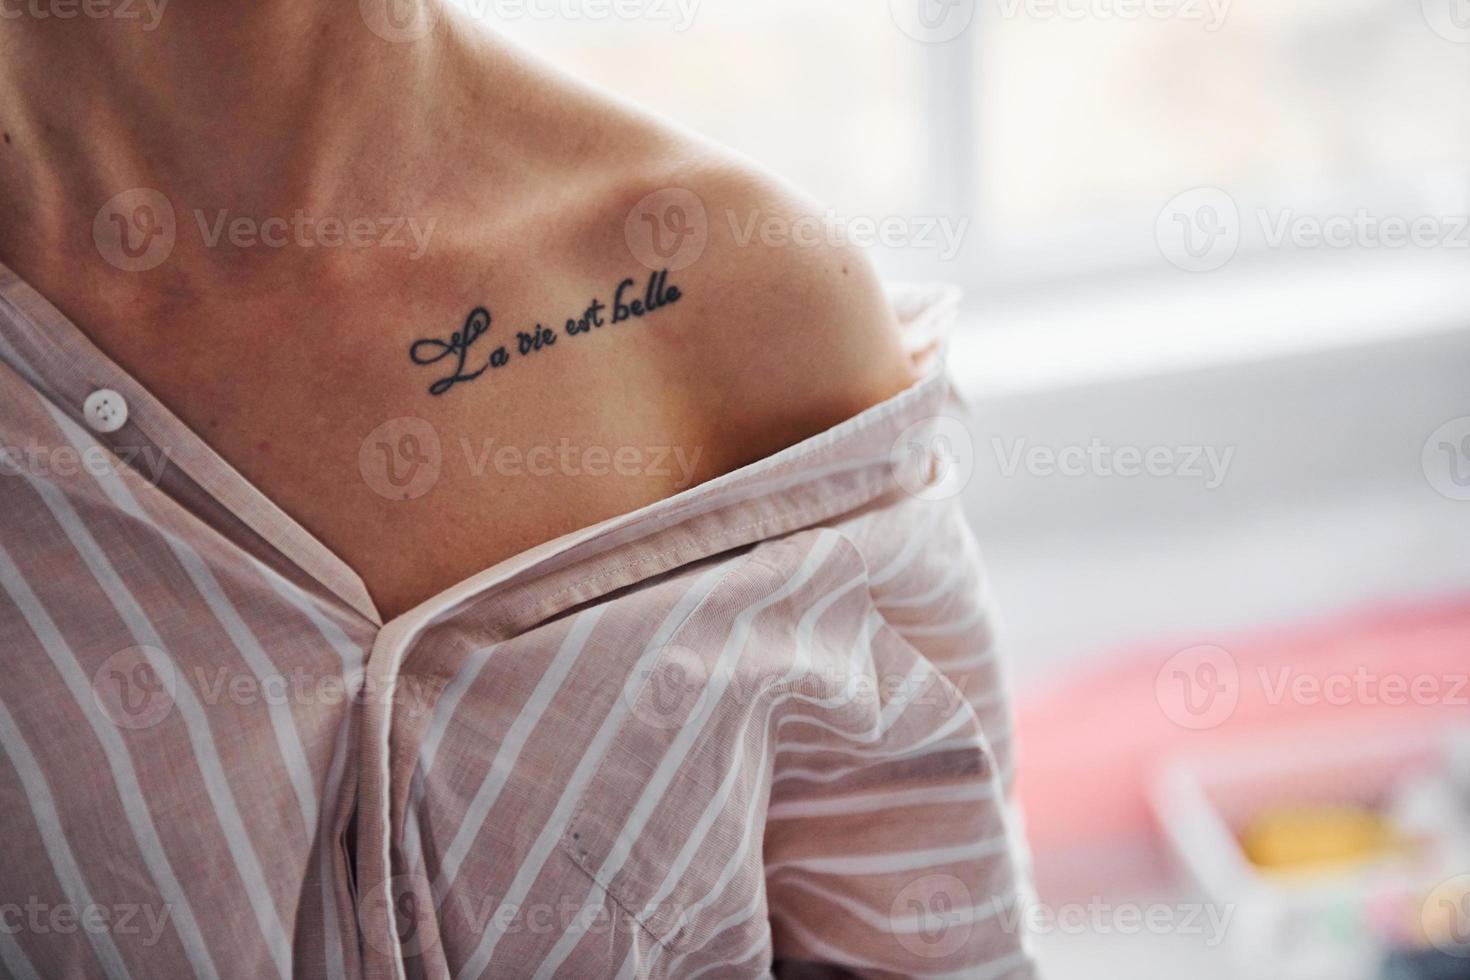 Close up view of tattoo of woman in shirt with stripes indoors photo